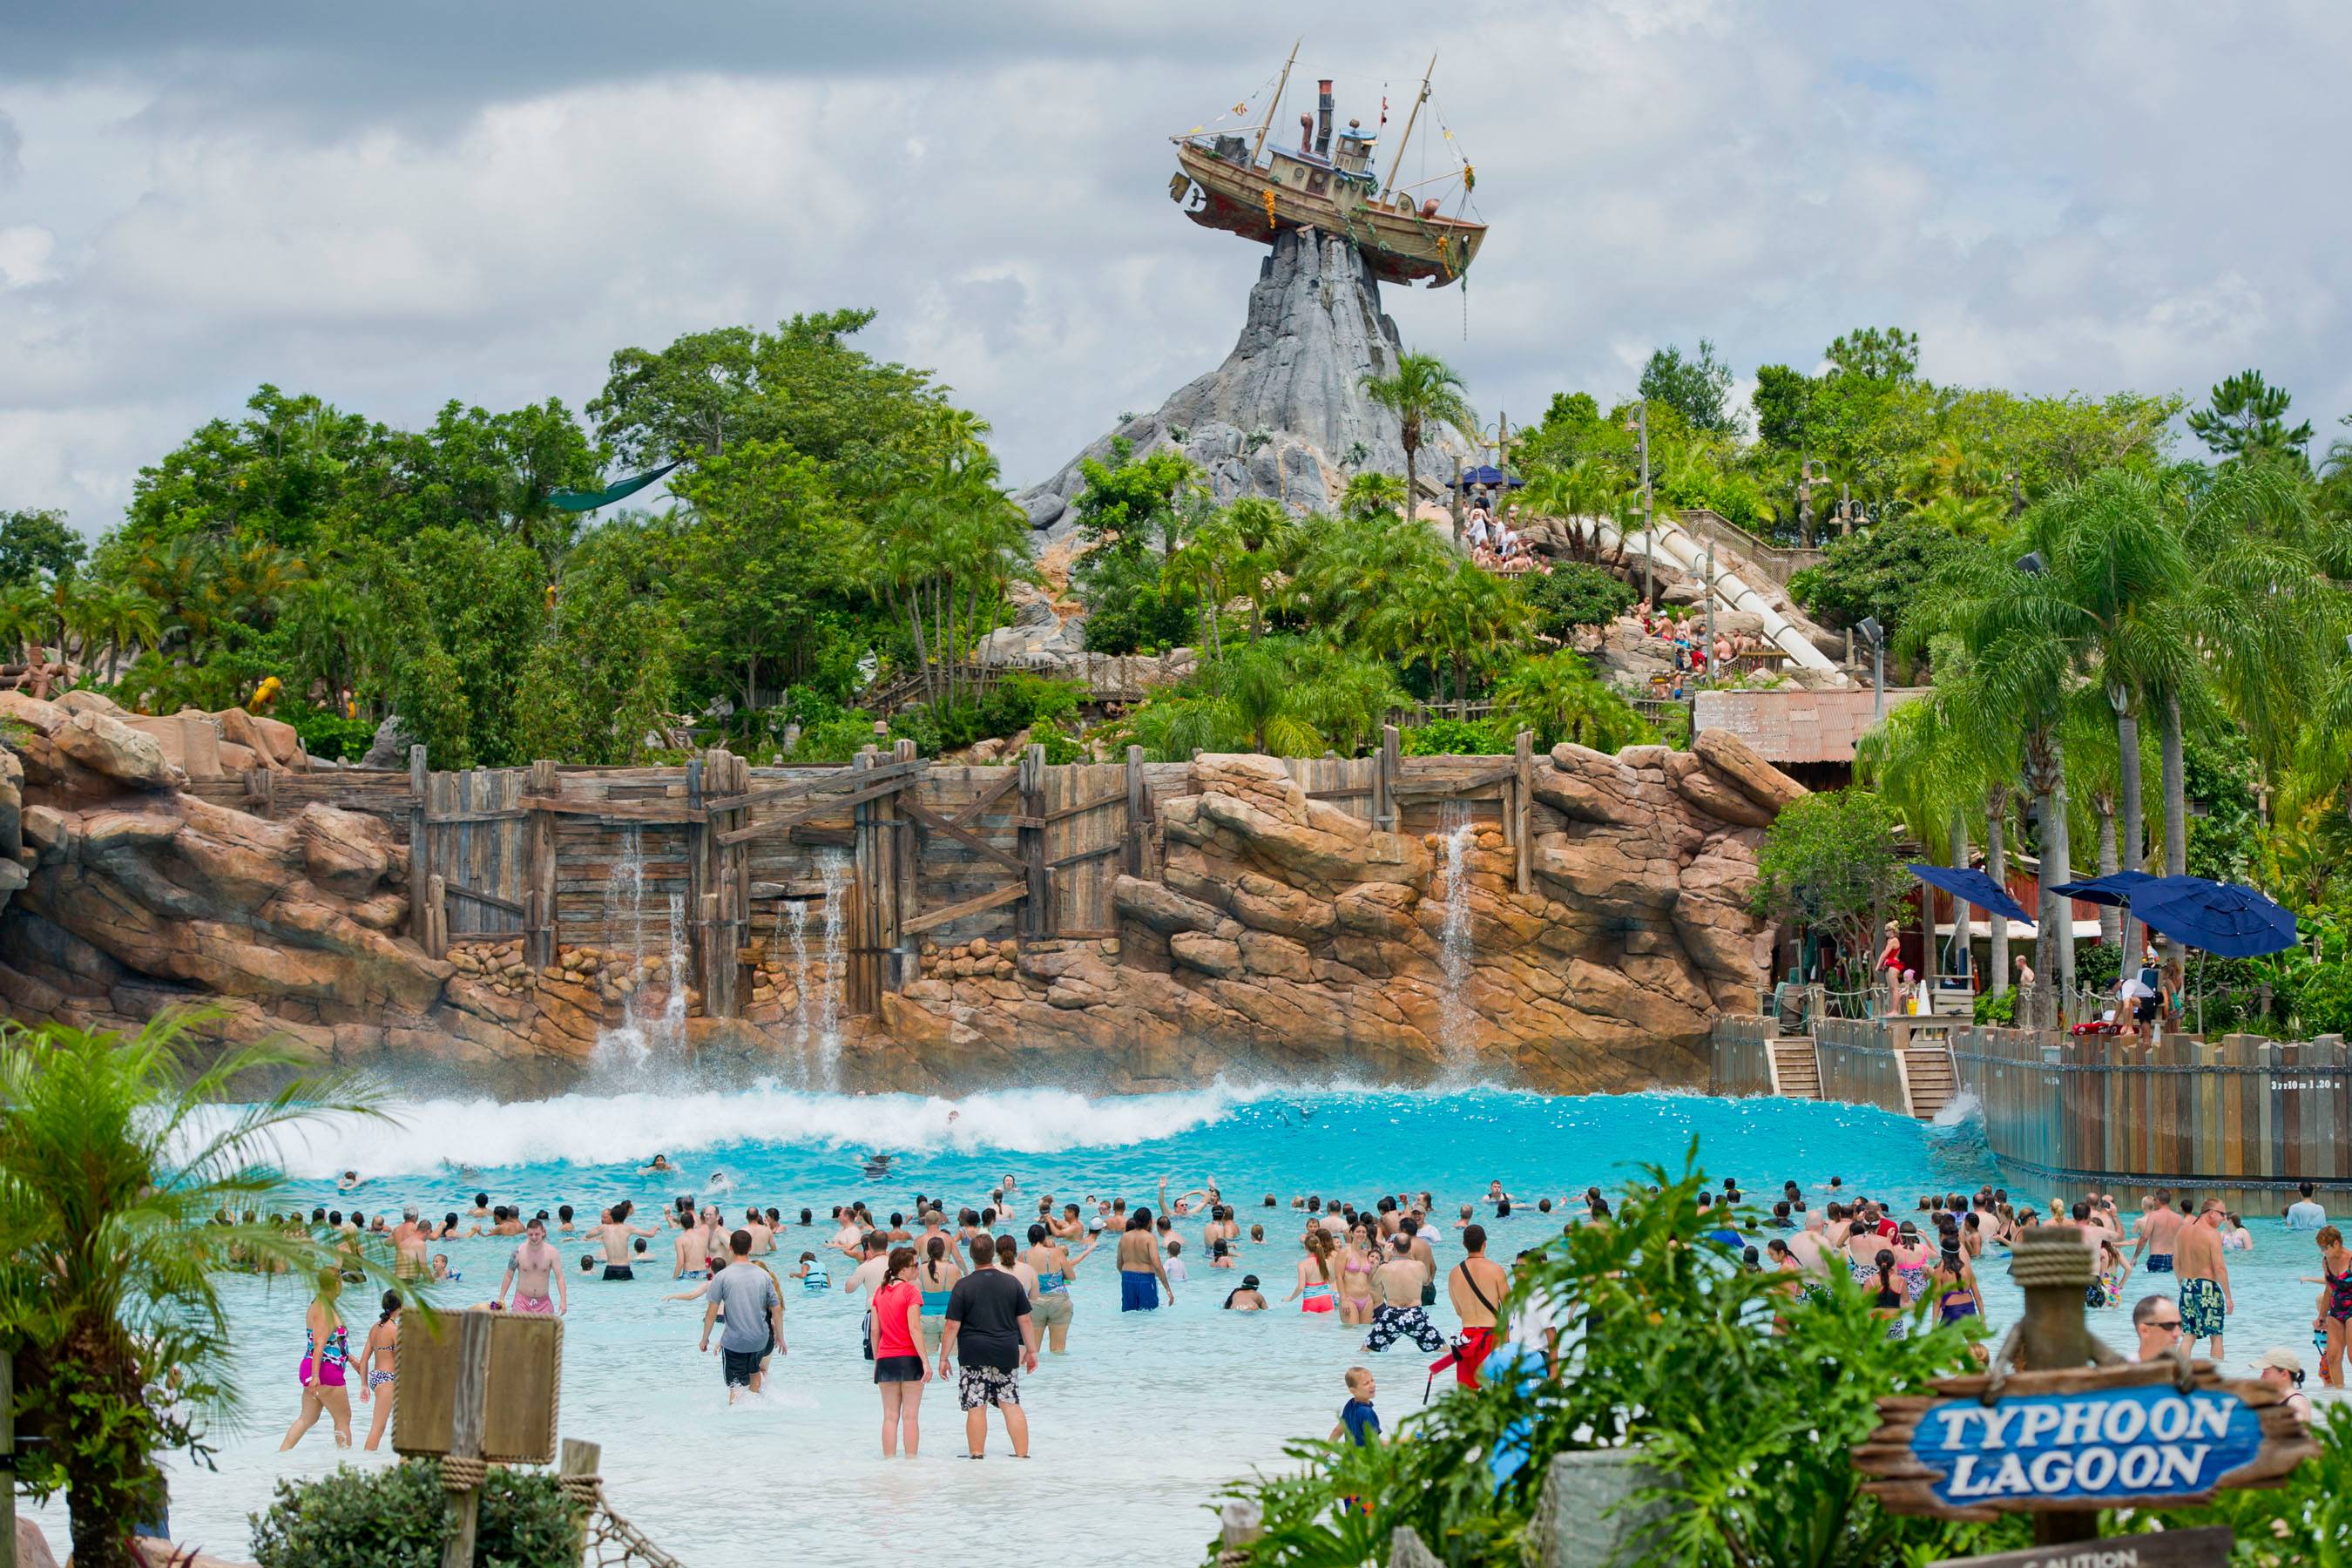 Reminder - Typhoon Lagoon is now closed for it's annual refurbishment